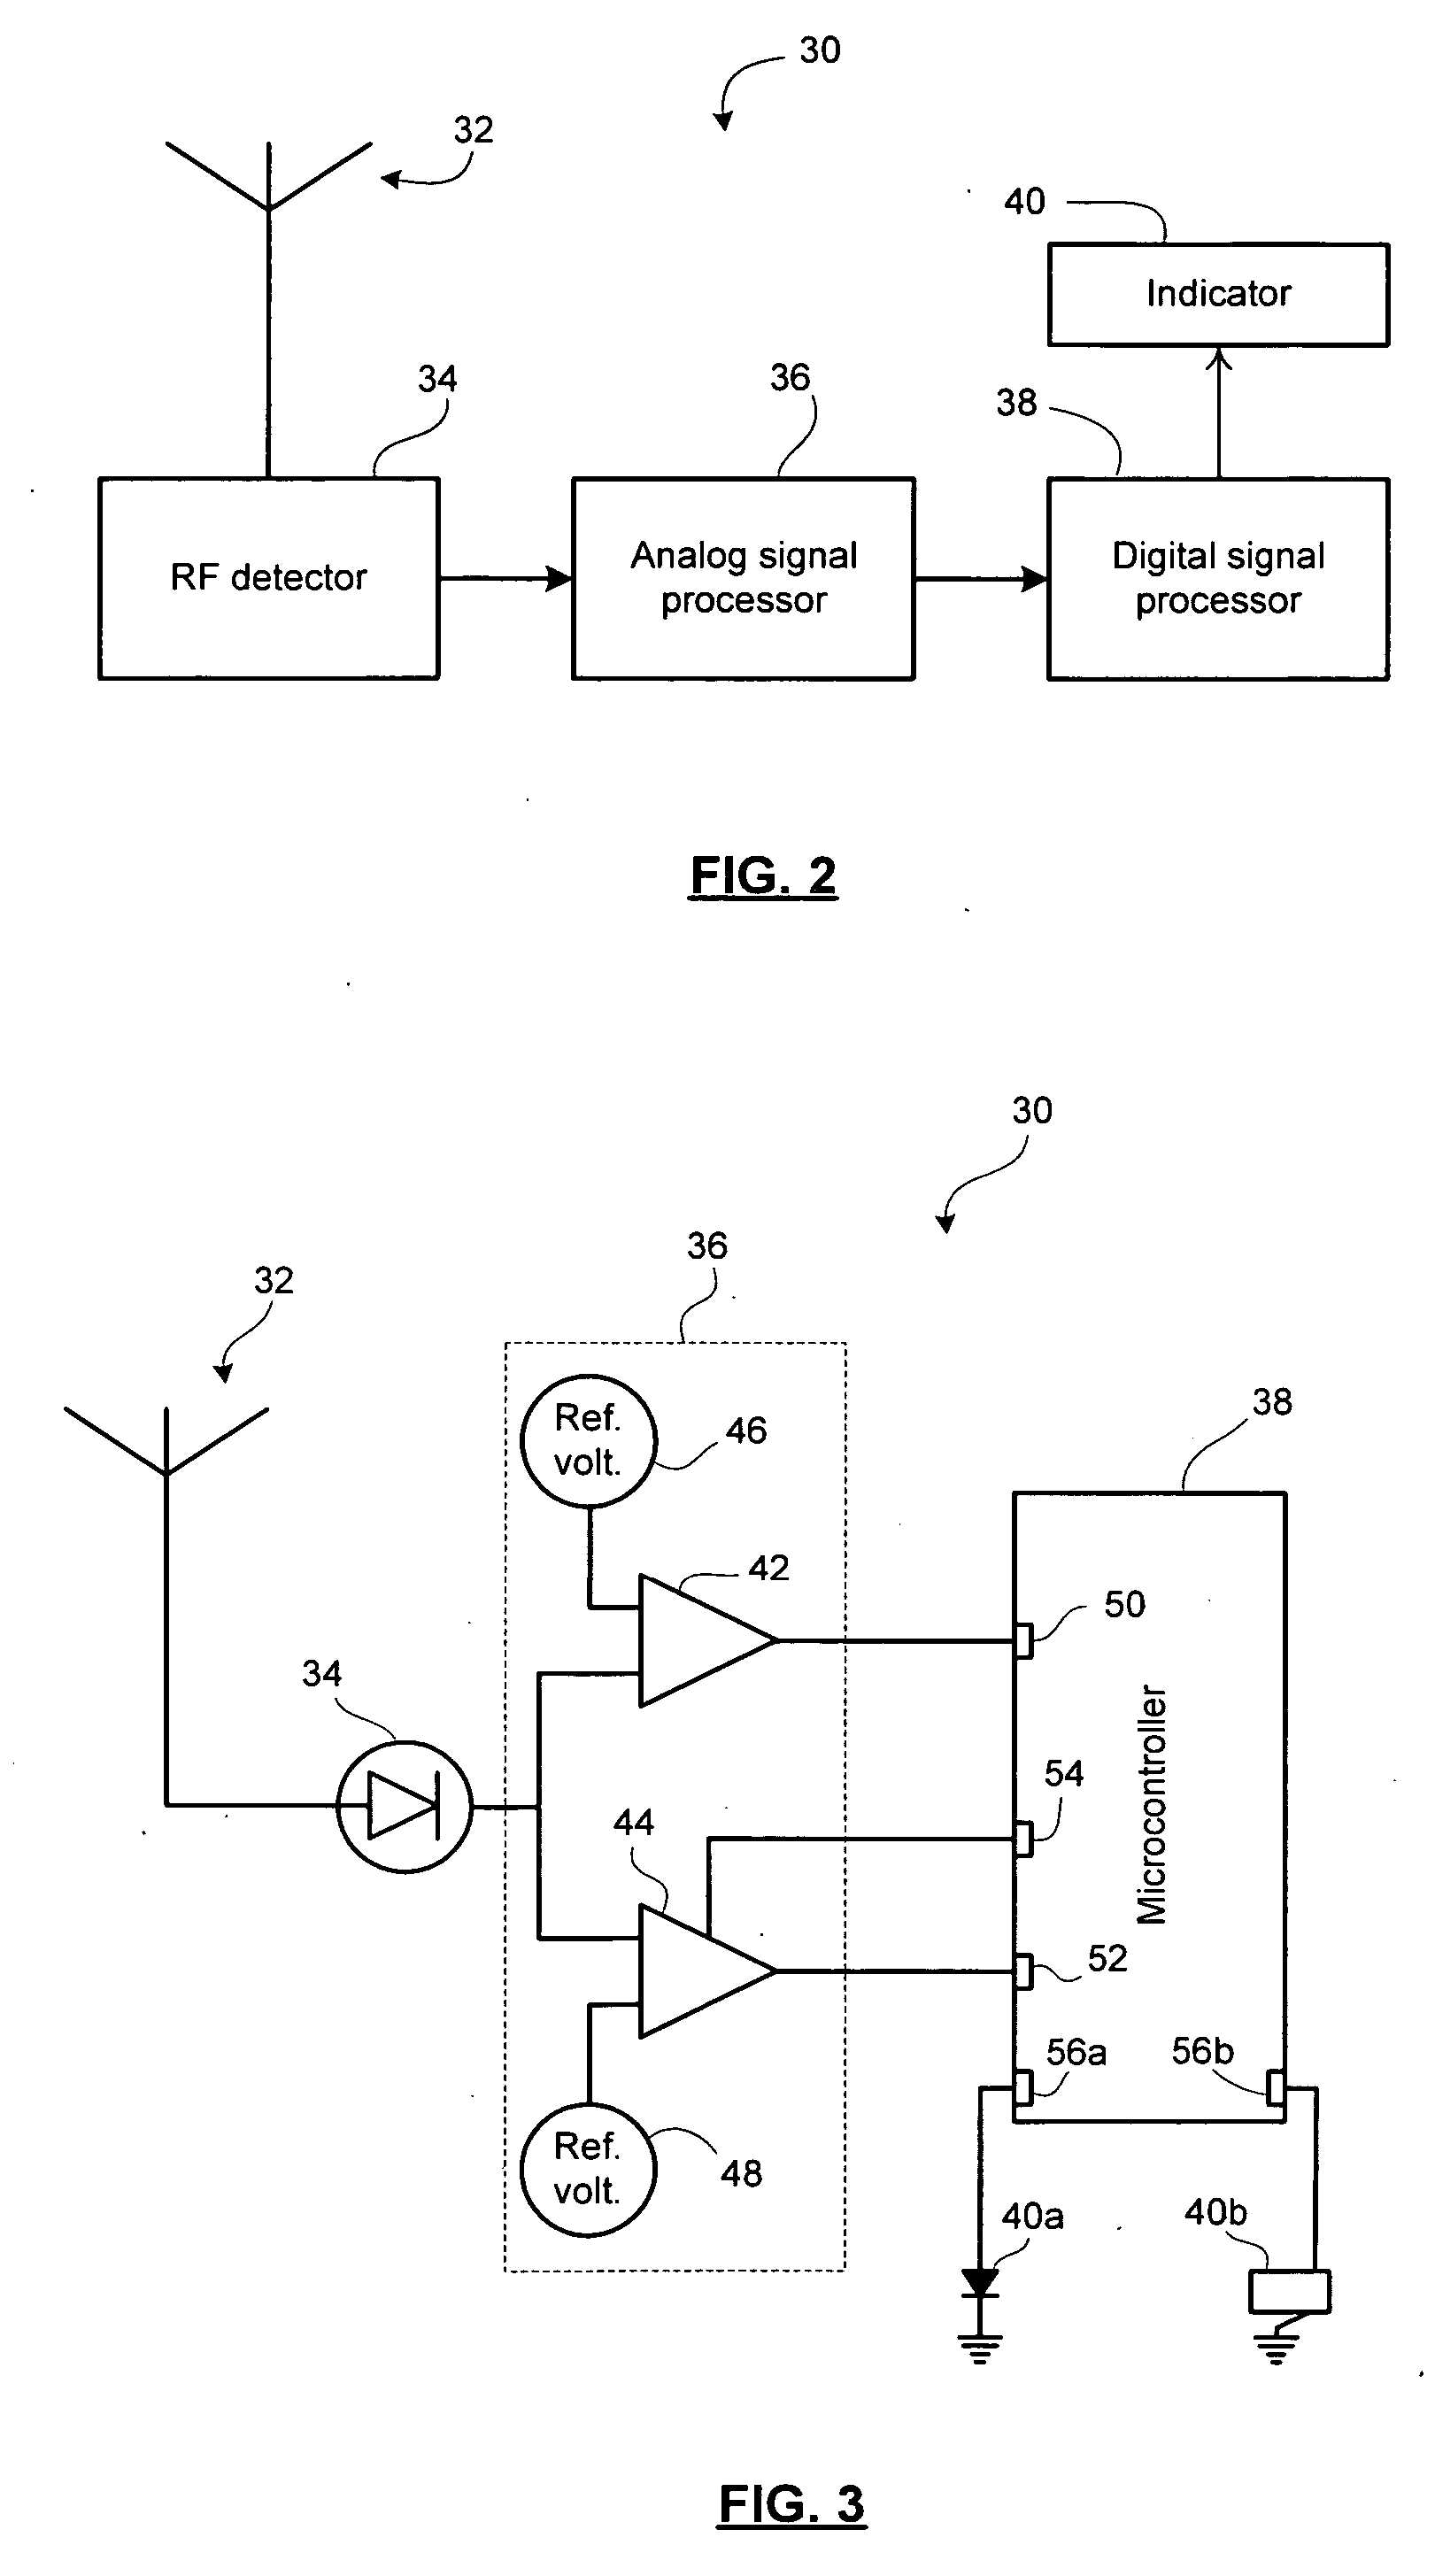 External indicator for electronic toll communications